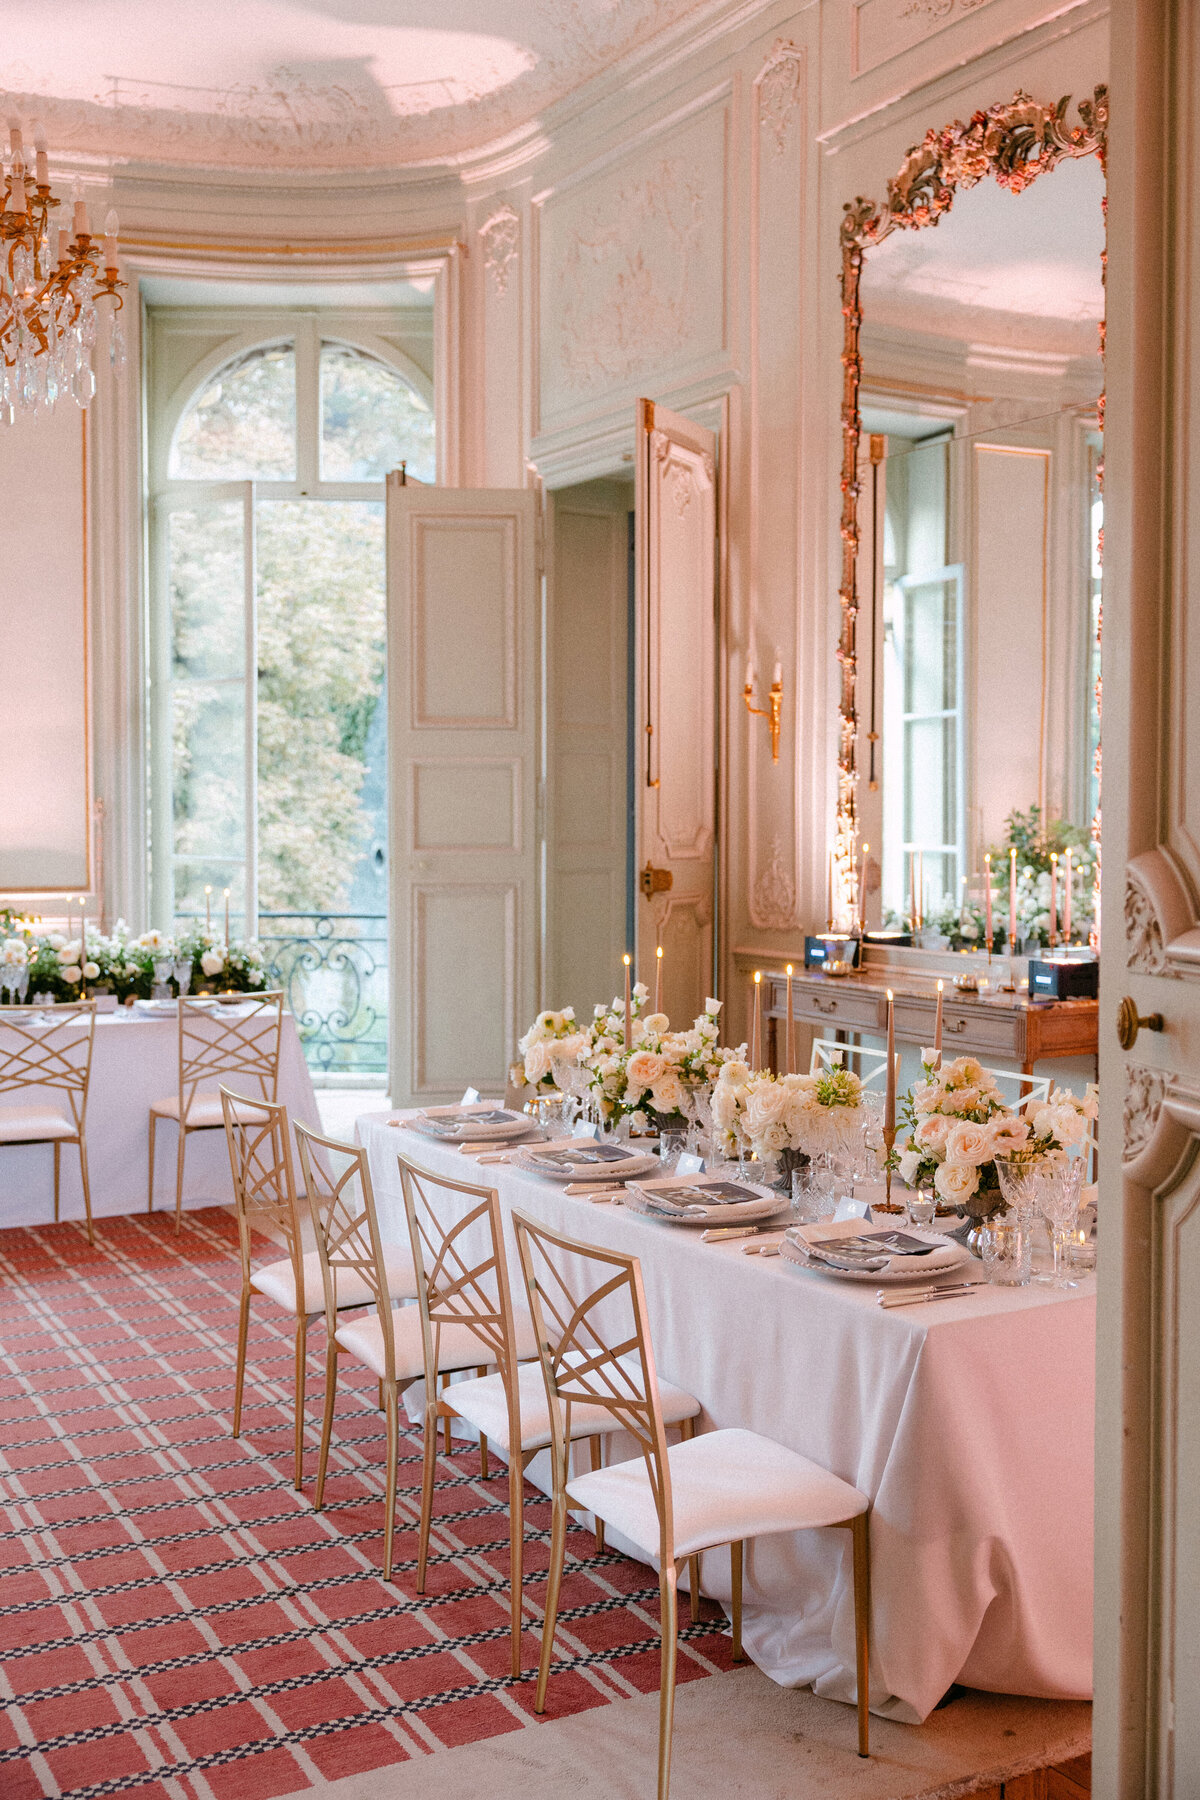 Jennifer Fox Weddings English speaking wedding planning & design agency in France crafting refined and bespoke weddings and celebrations Provence, Paris and destination wd816